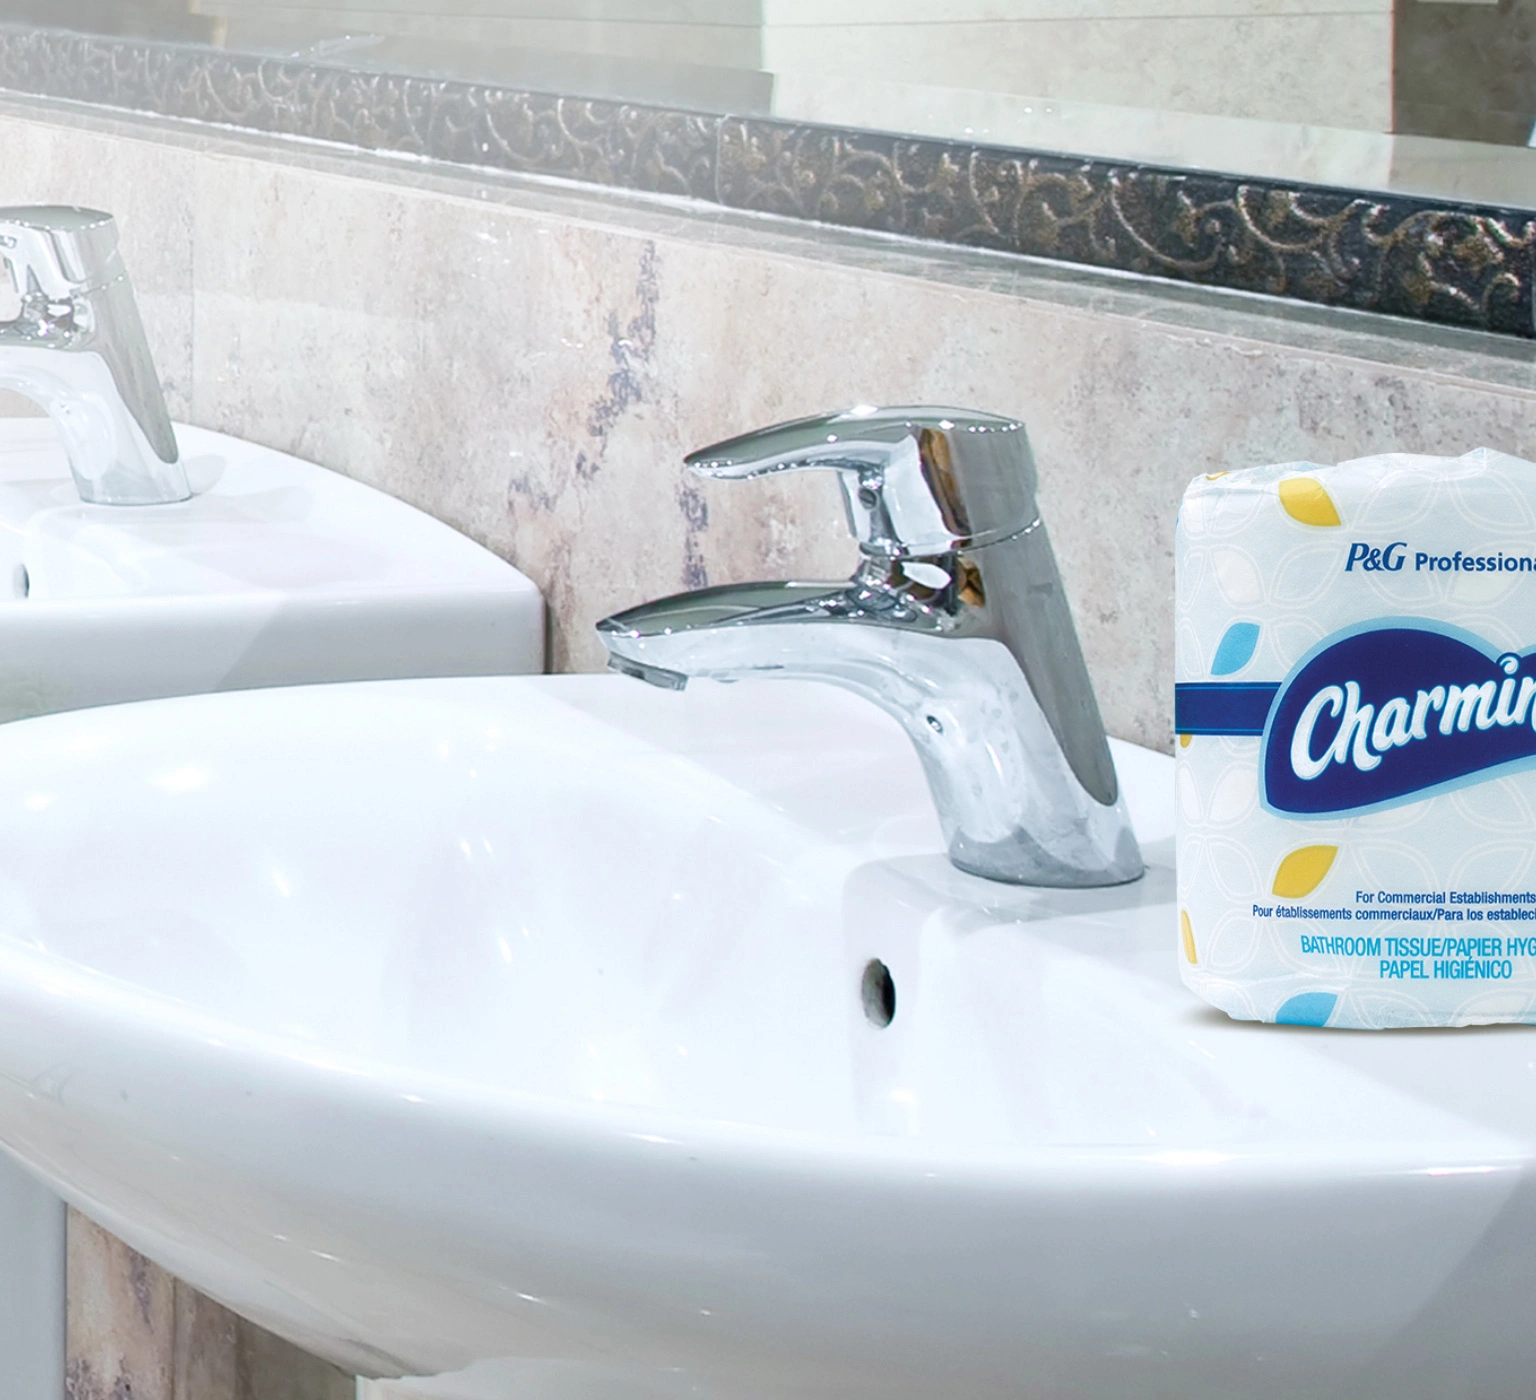 Use up to 4 time less with Charmin